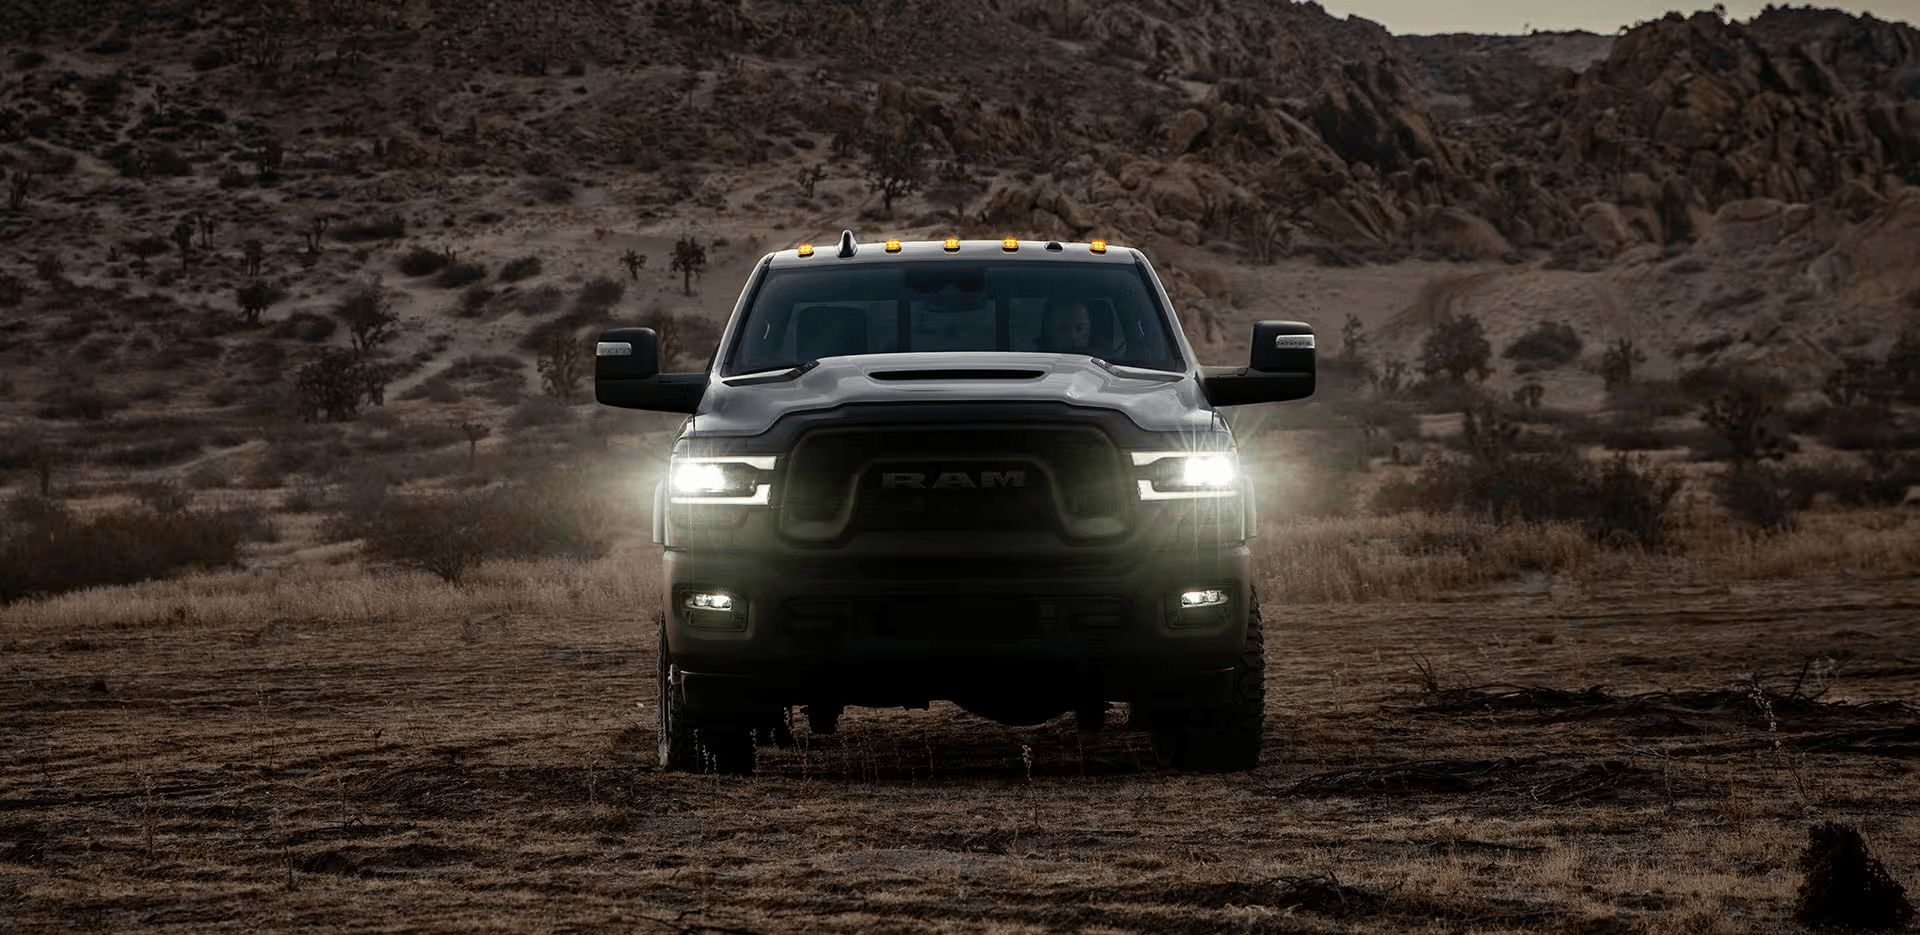 A head-on view of a RAM 2500 Rebel with its headlamps on, being driven off-road in the desert at dusk.